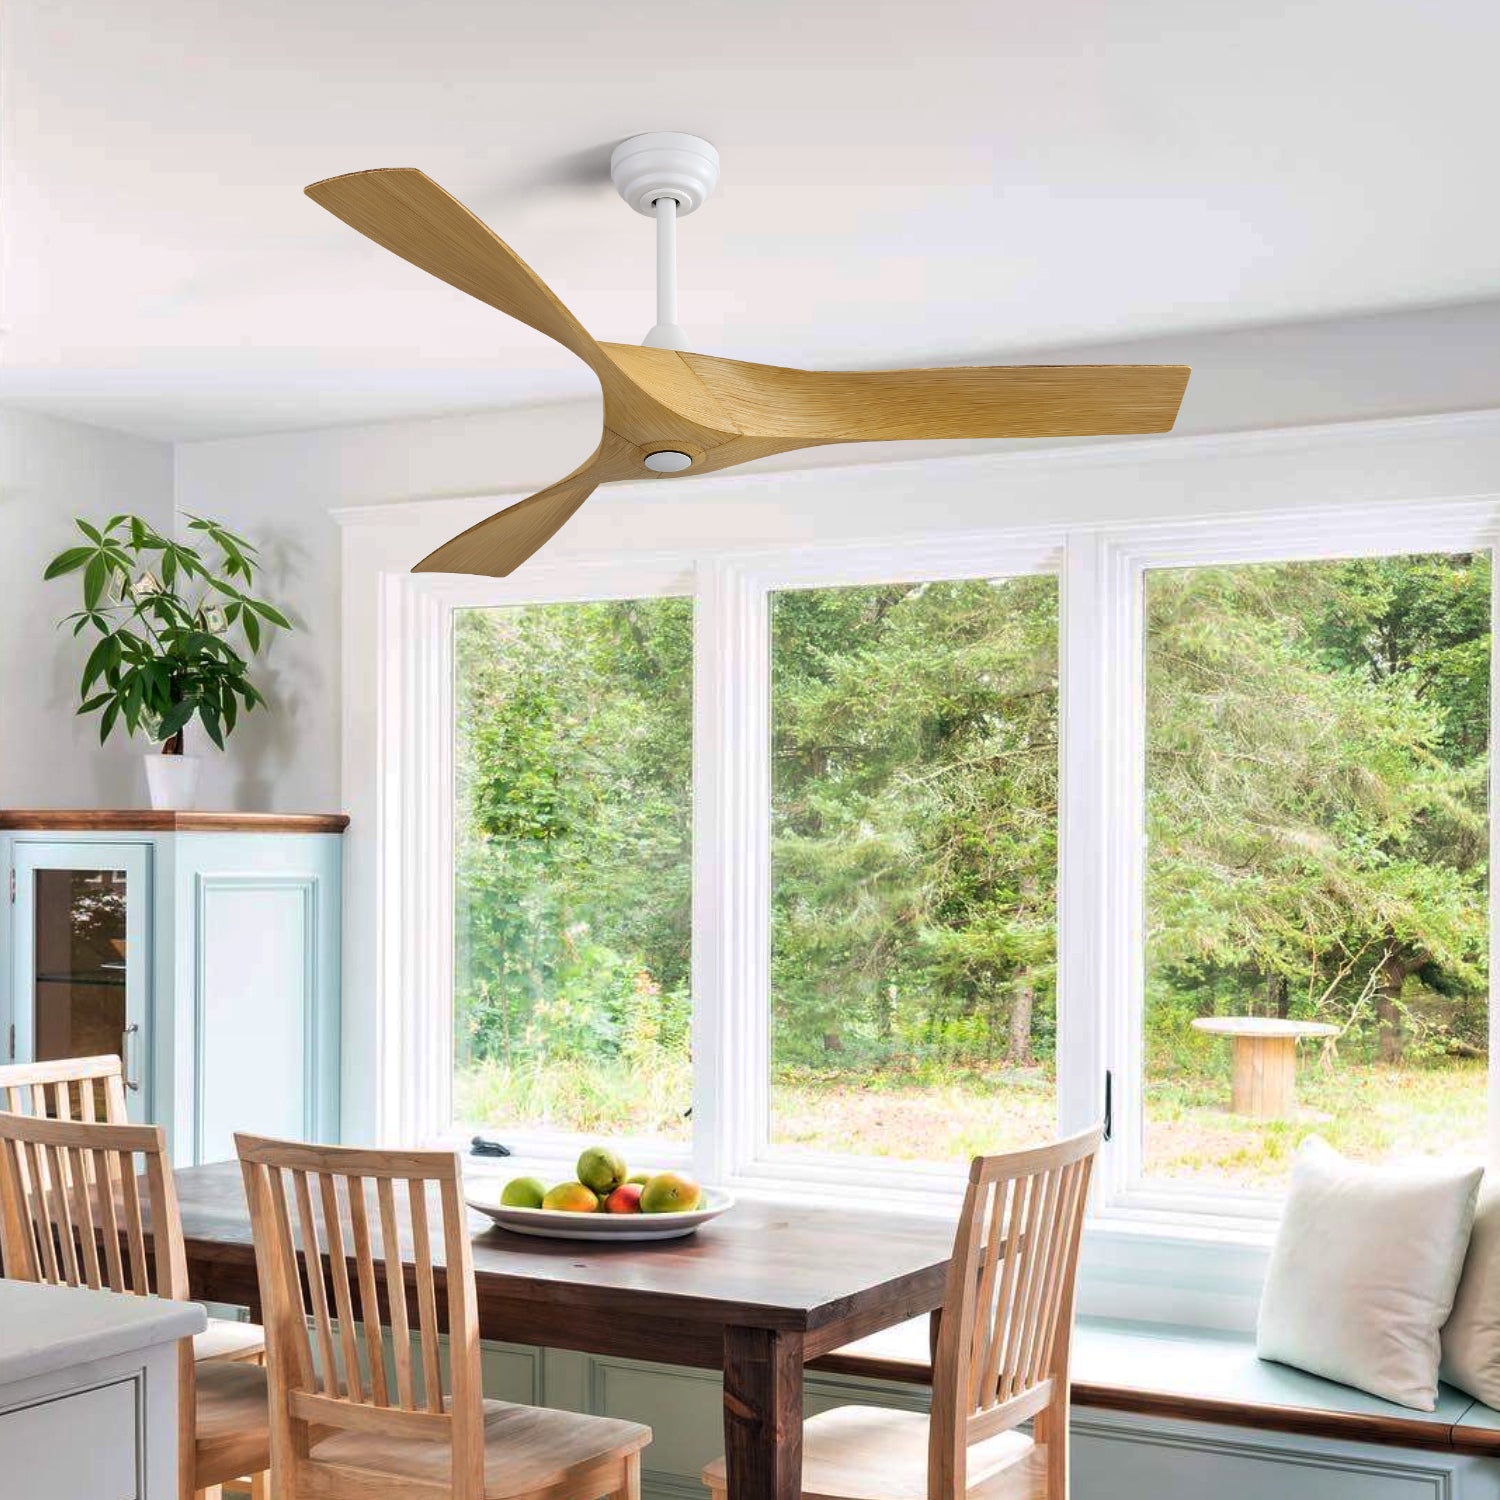 52 Inch Modern Ceiling Fan With 3 ABS Blades Remote white-abs